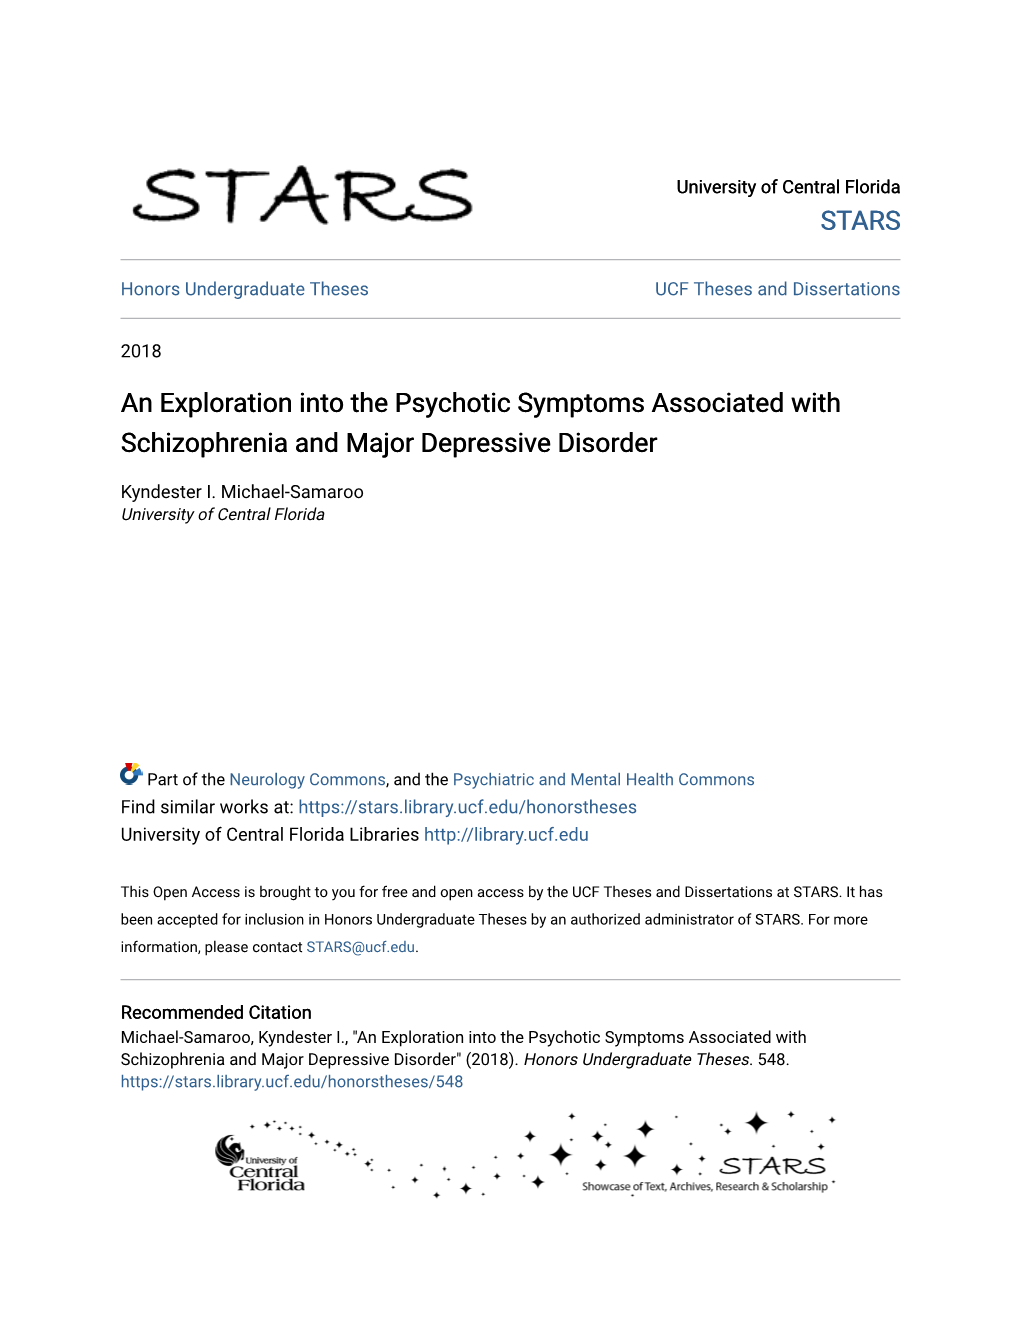 An Exploration Into the Psychotic Symptoms Associated with Schizophrenia and Major Depressive Disorder